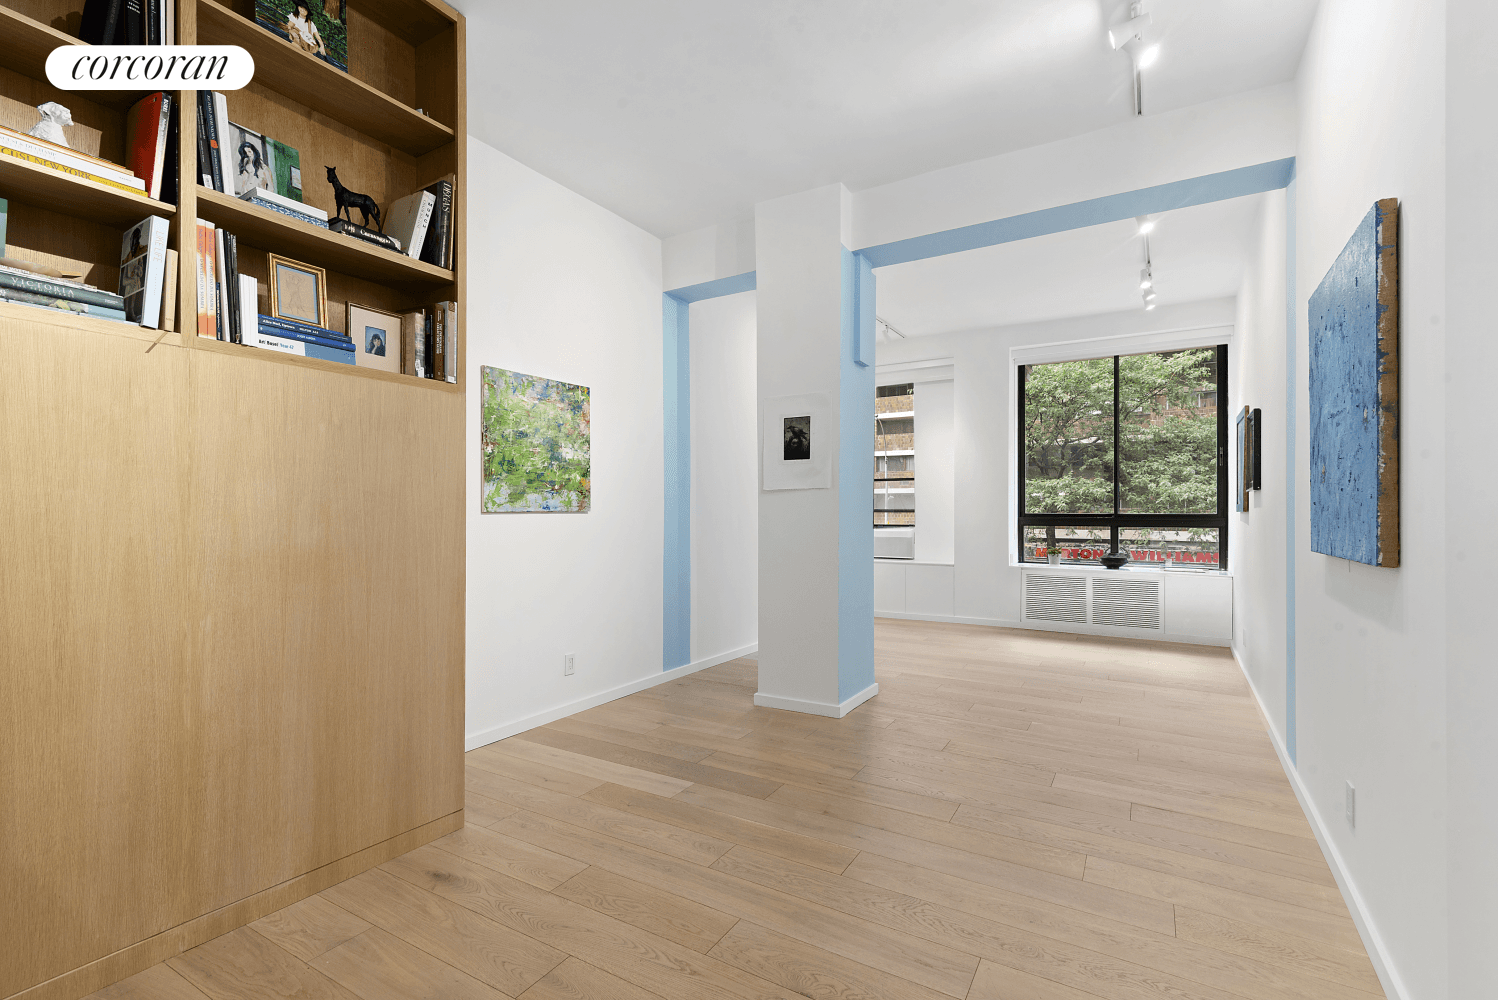 Exquisitely renovated with unparalleled craftsmanship, this modern CONDOP loft studio is in perfect turn key condition for a June 1st Move In.